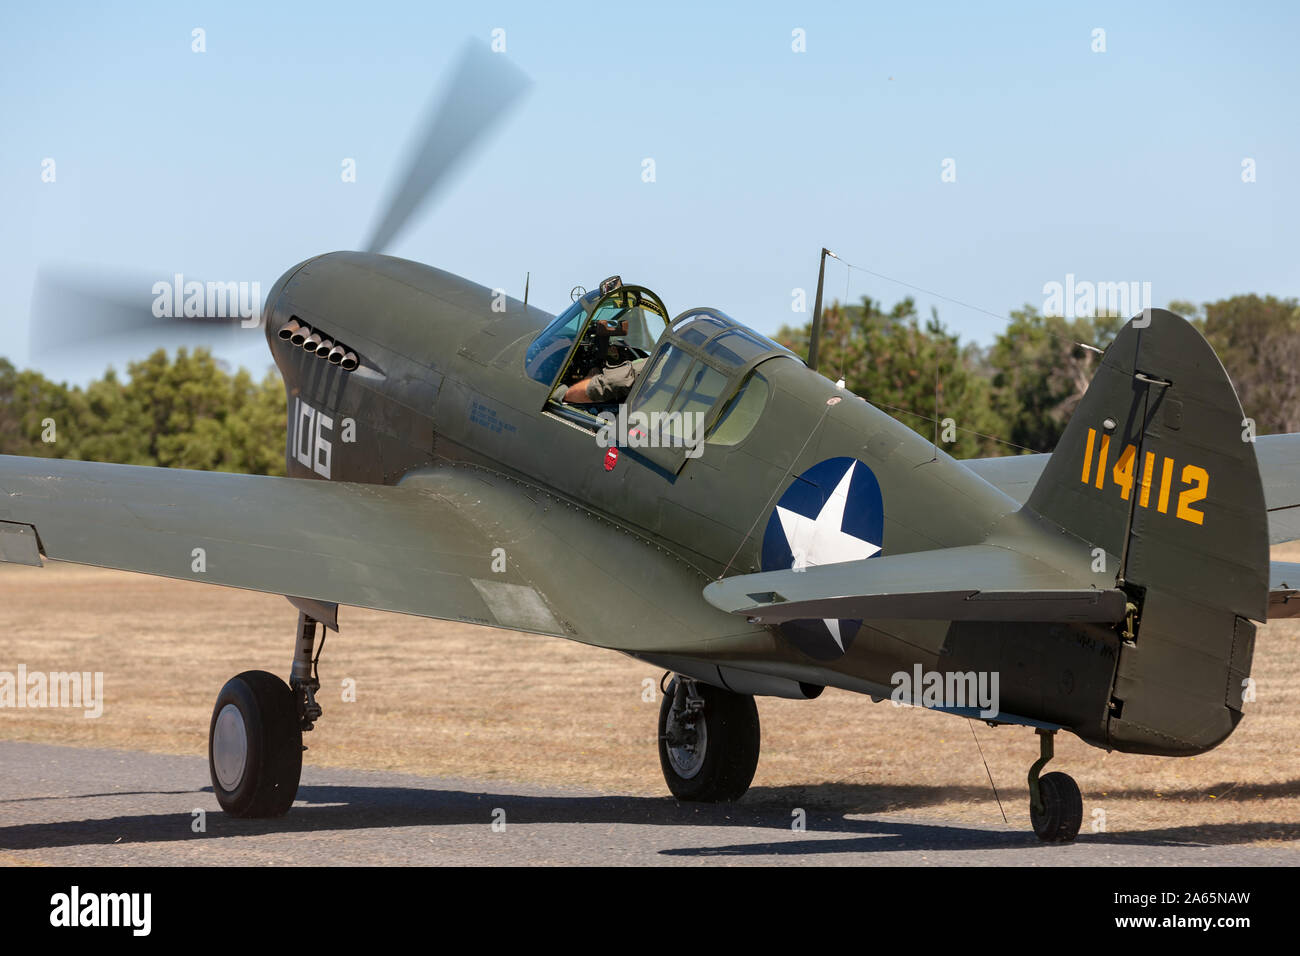 Curtiss P-40F Kittyhawk fighter aircraft that served with the 44th fighter squadron, 18th fighter group of the US Ar Stock Photo